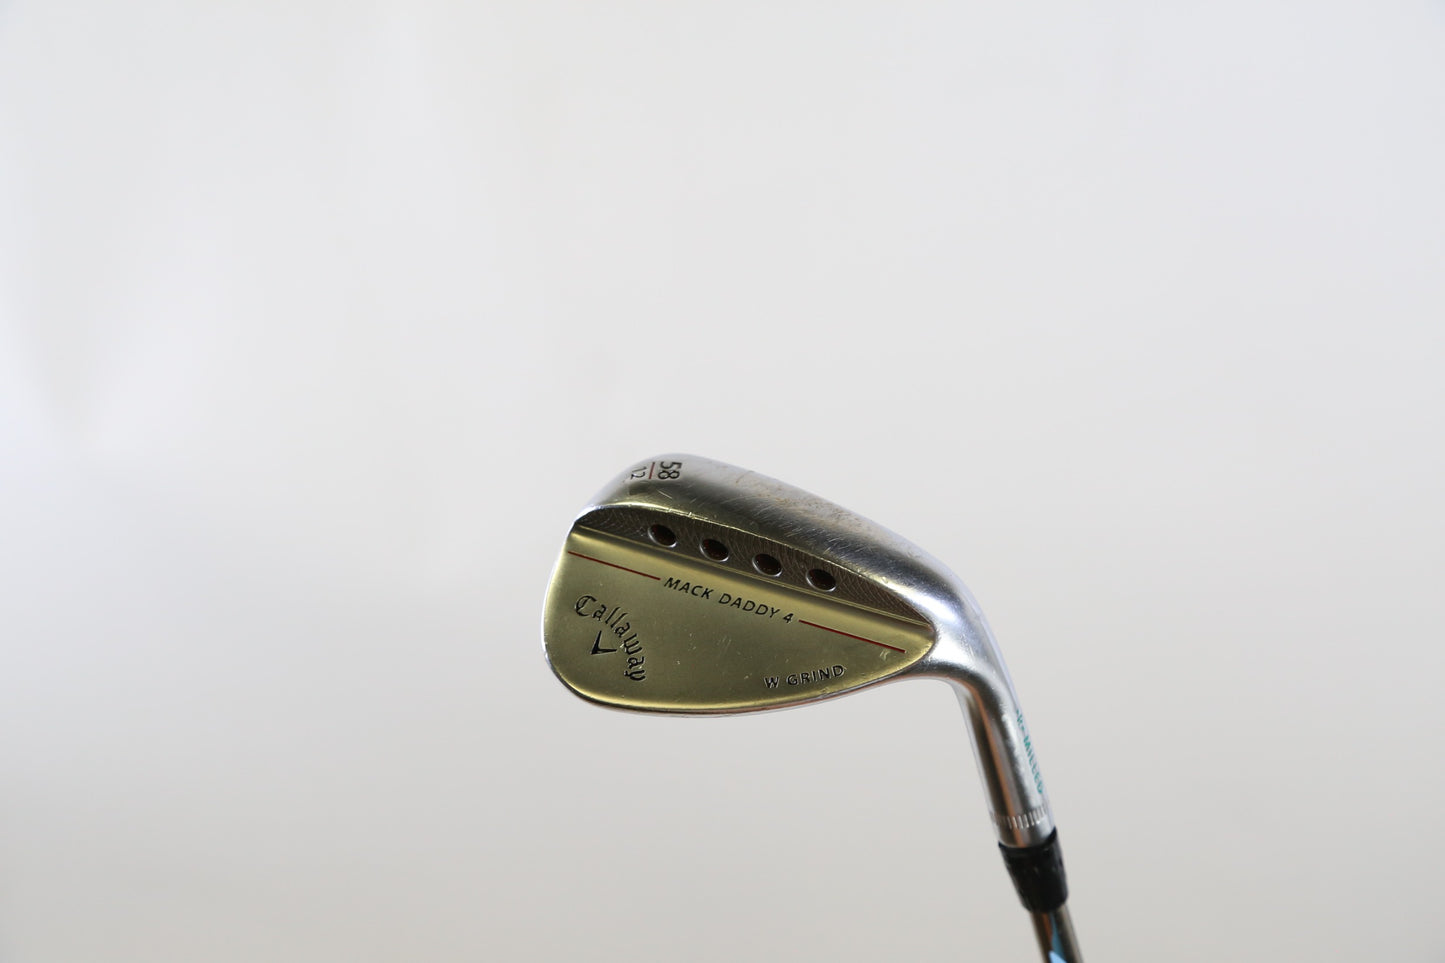 Used Callaway Mack Daddy 4 Tactical Lob Wedge - Right-Handed - 58 Degrees - Regular Flex